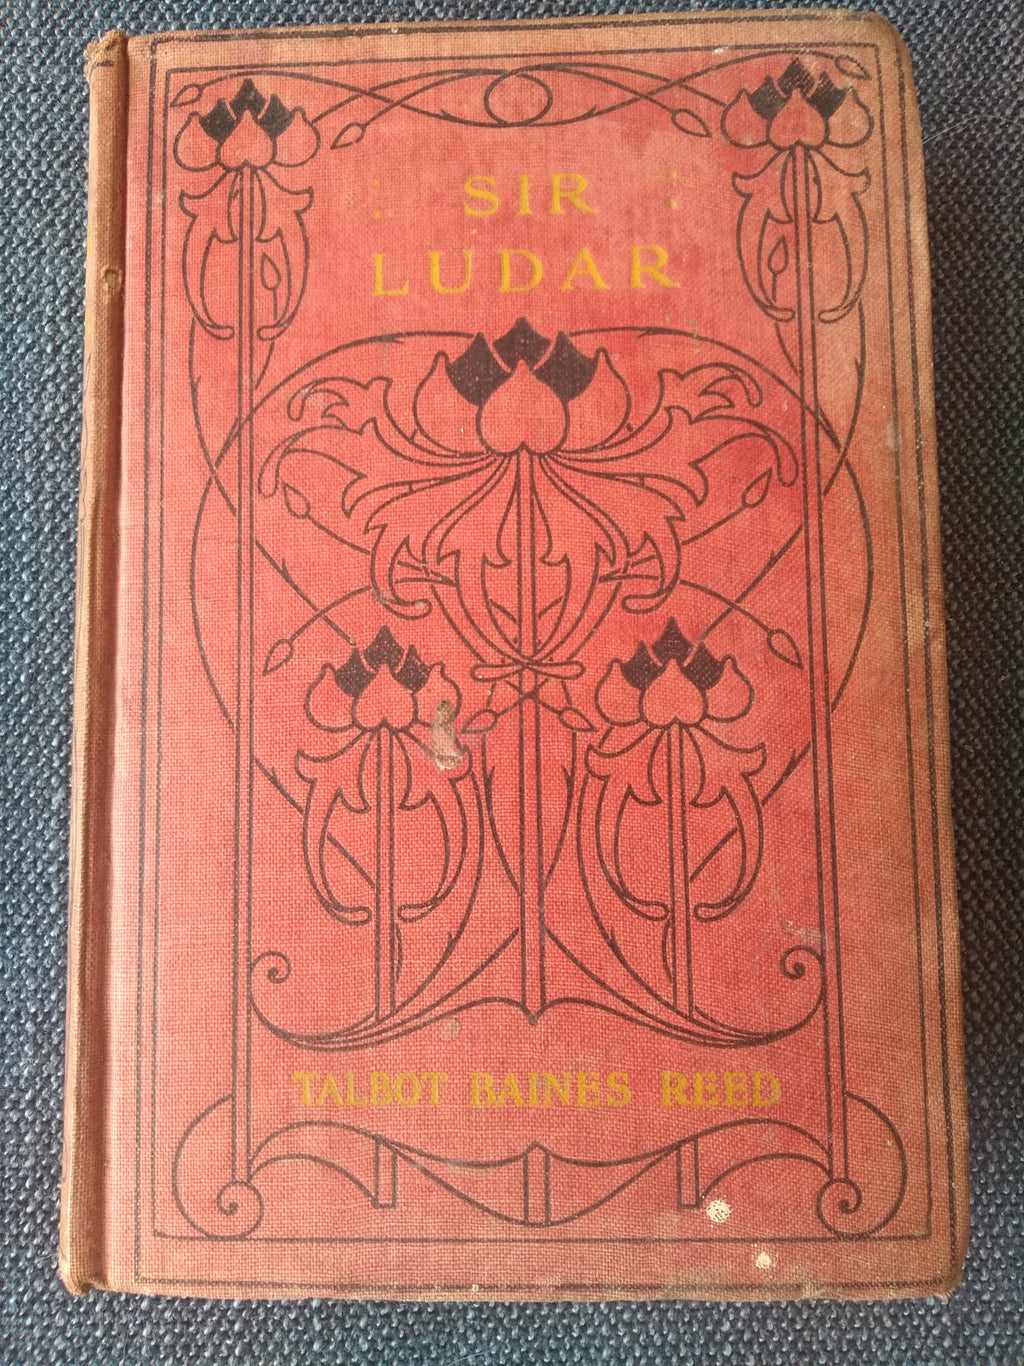 Sir Ludar. A Story of the Days of Great Queen Bess, by Talbot Baines Reed